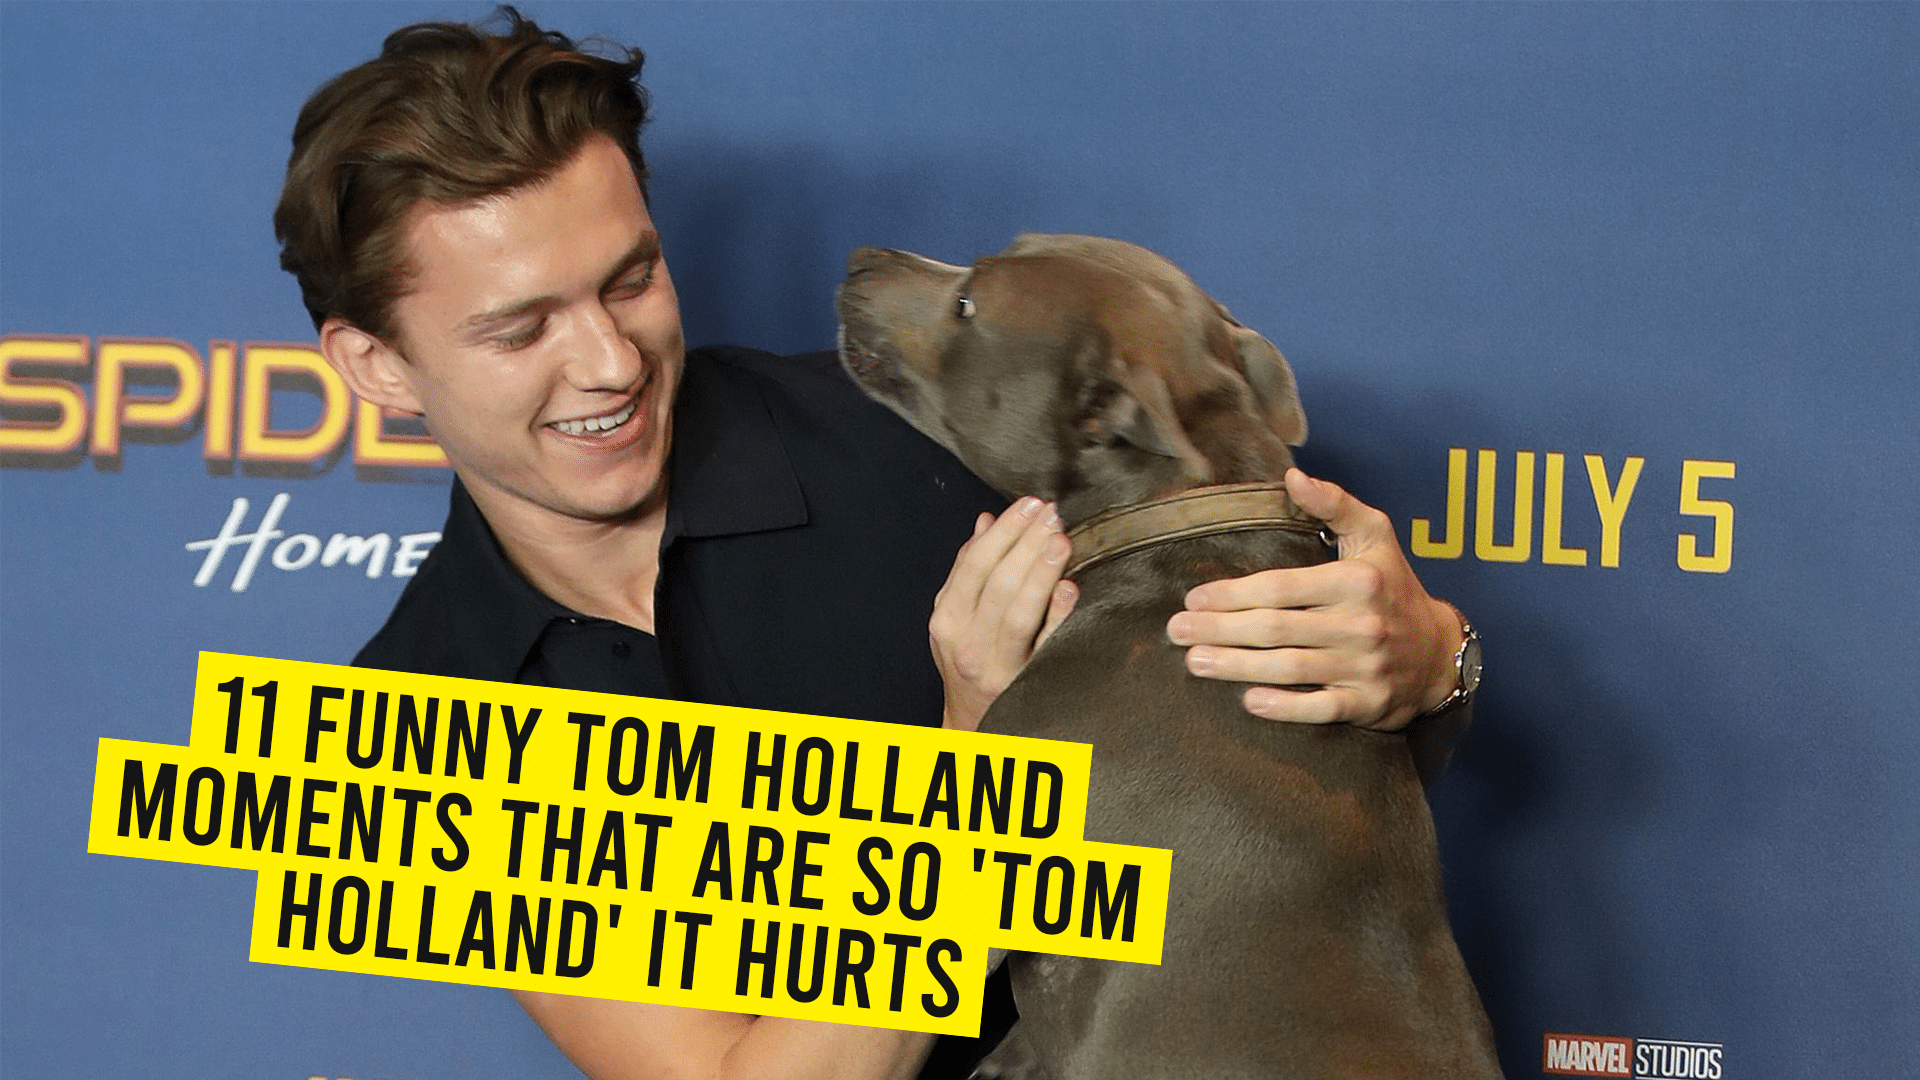 11 Funny Tom Holland Moments That Are So ‘Tom Holland’ It Hurts